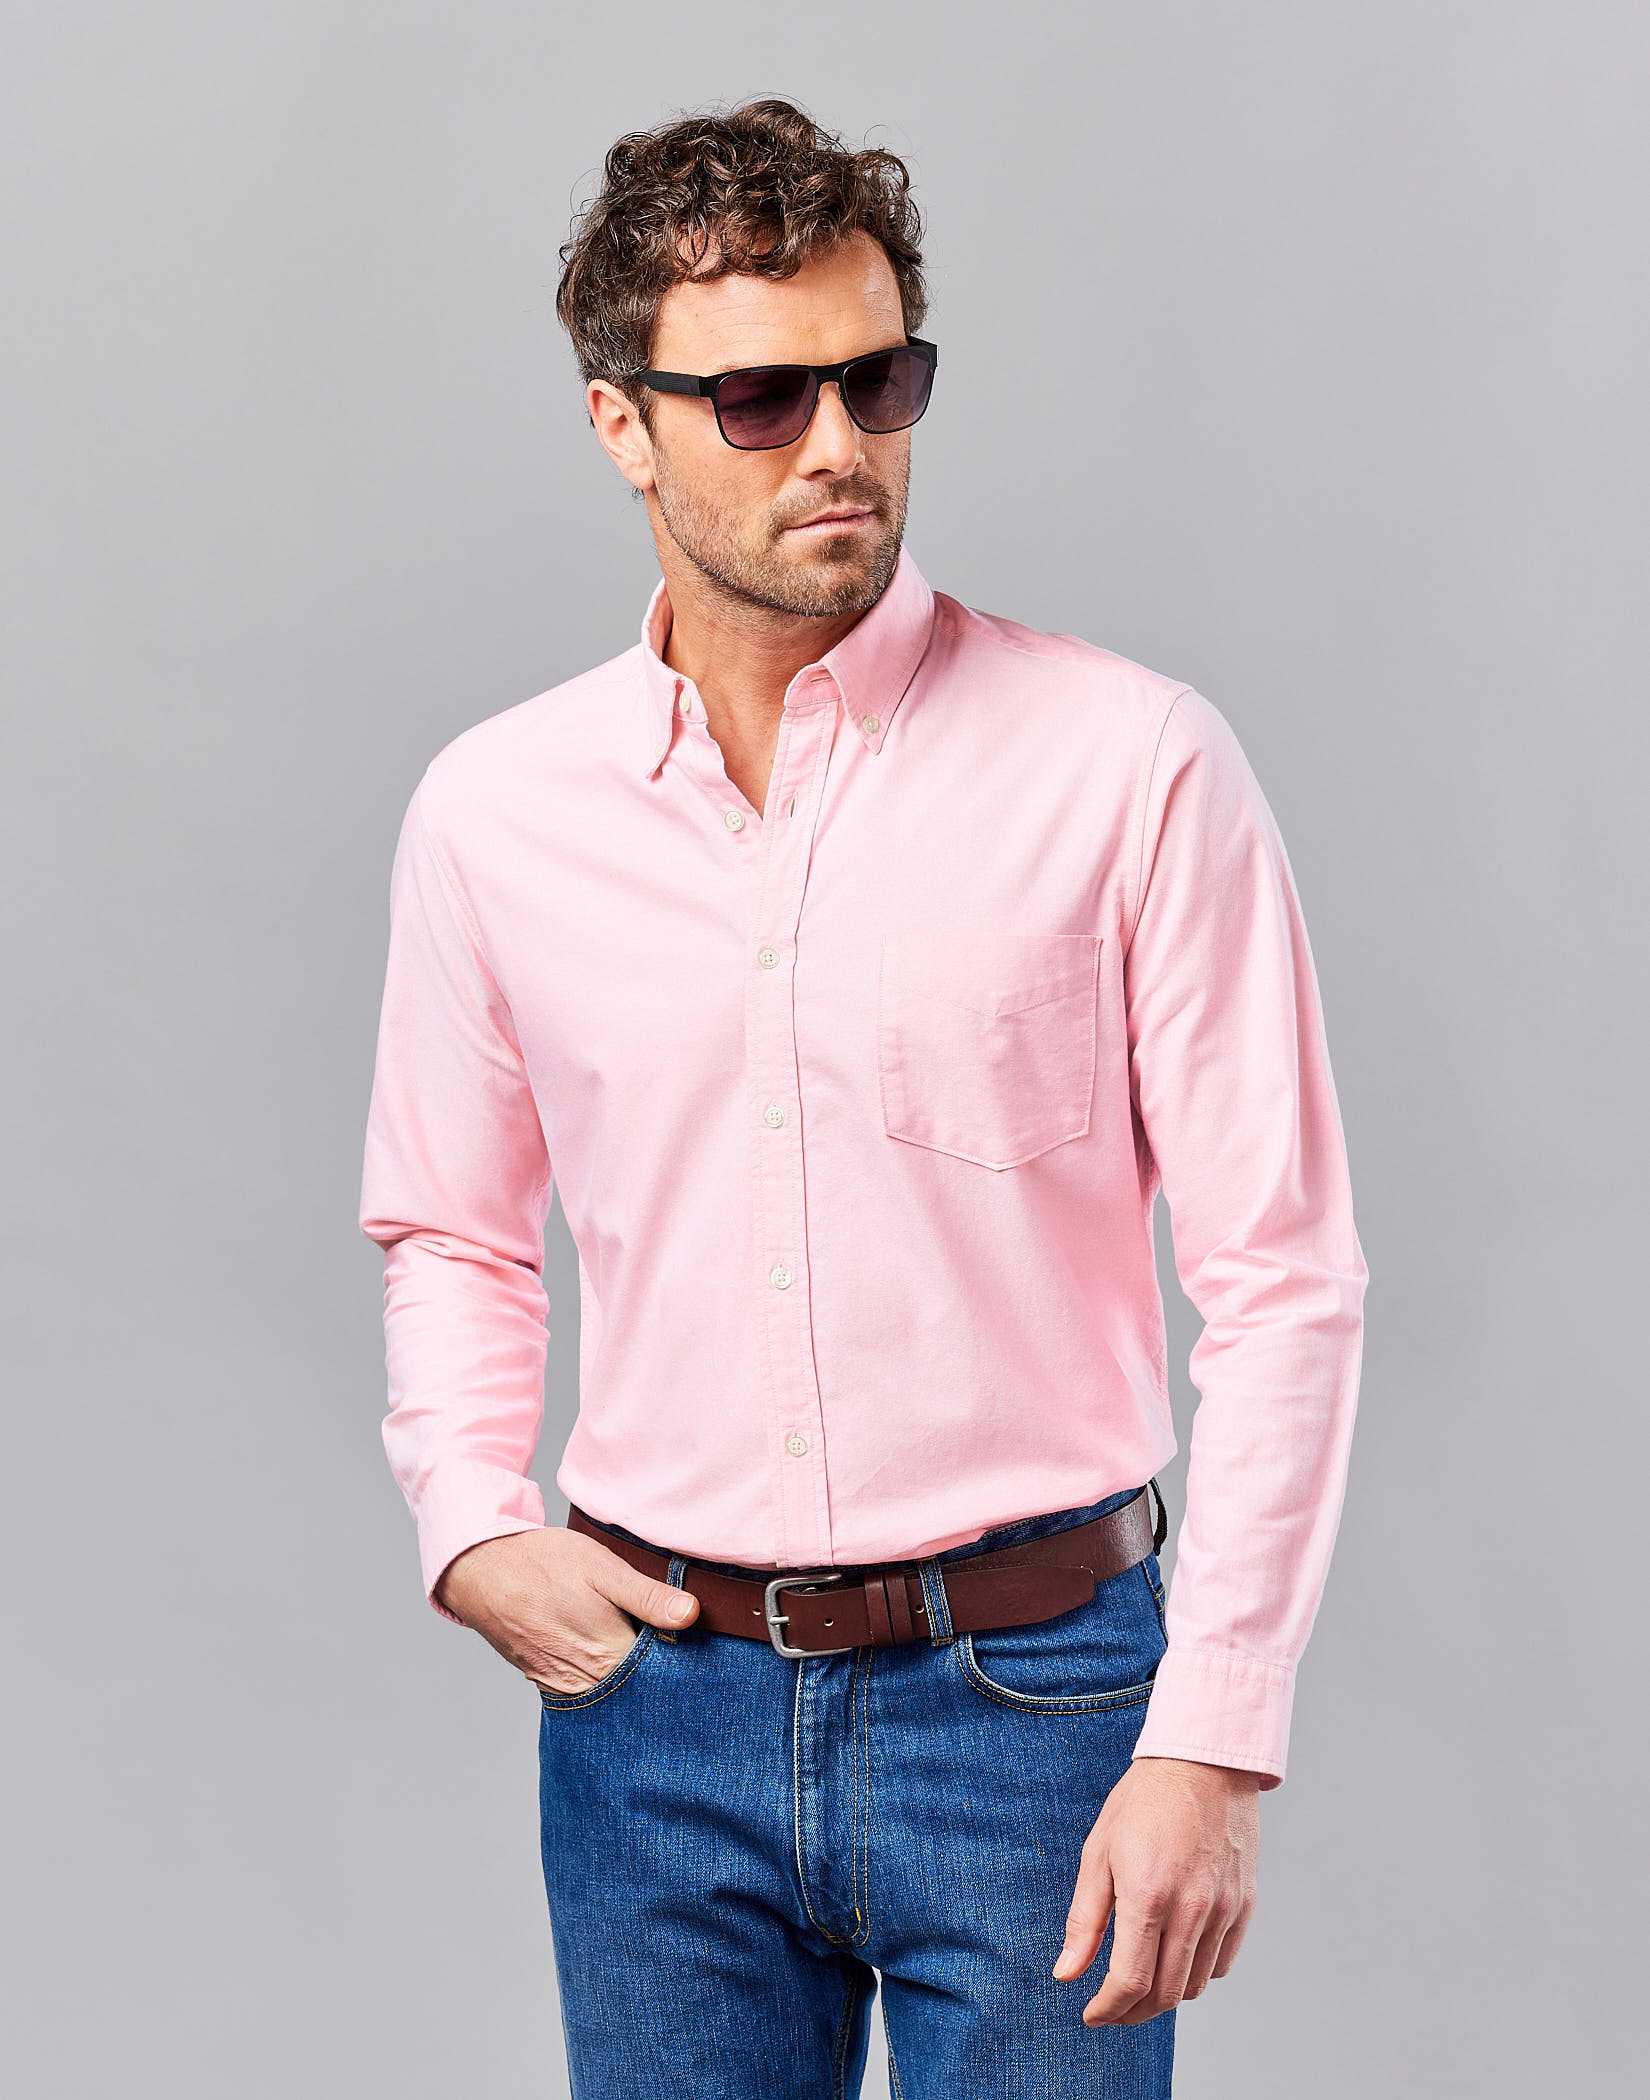 Mens Button Down Oxford Shirt in Pink - Oxford Shirt Co.